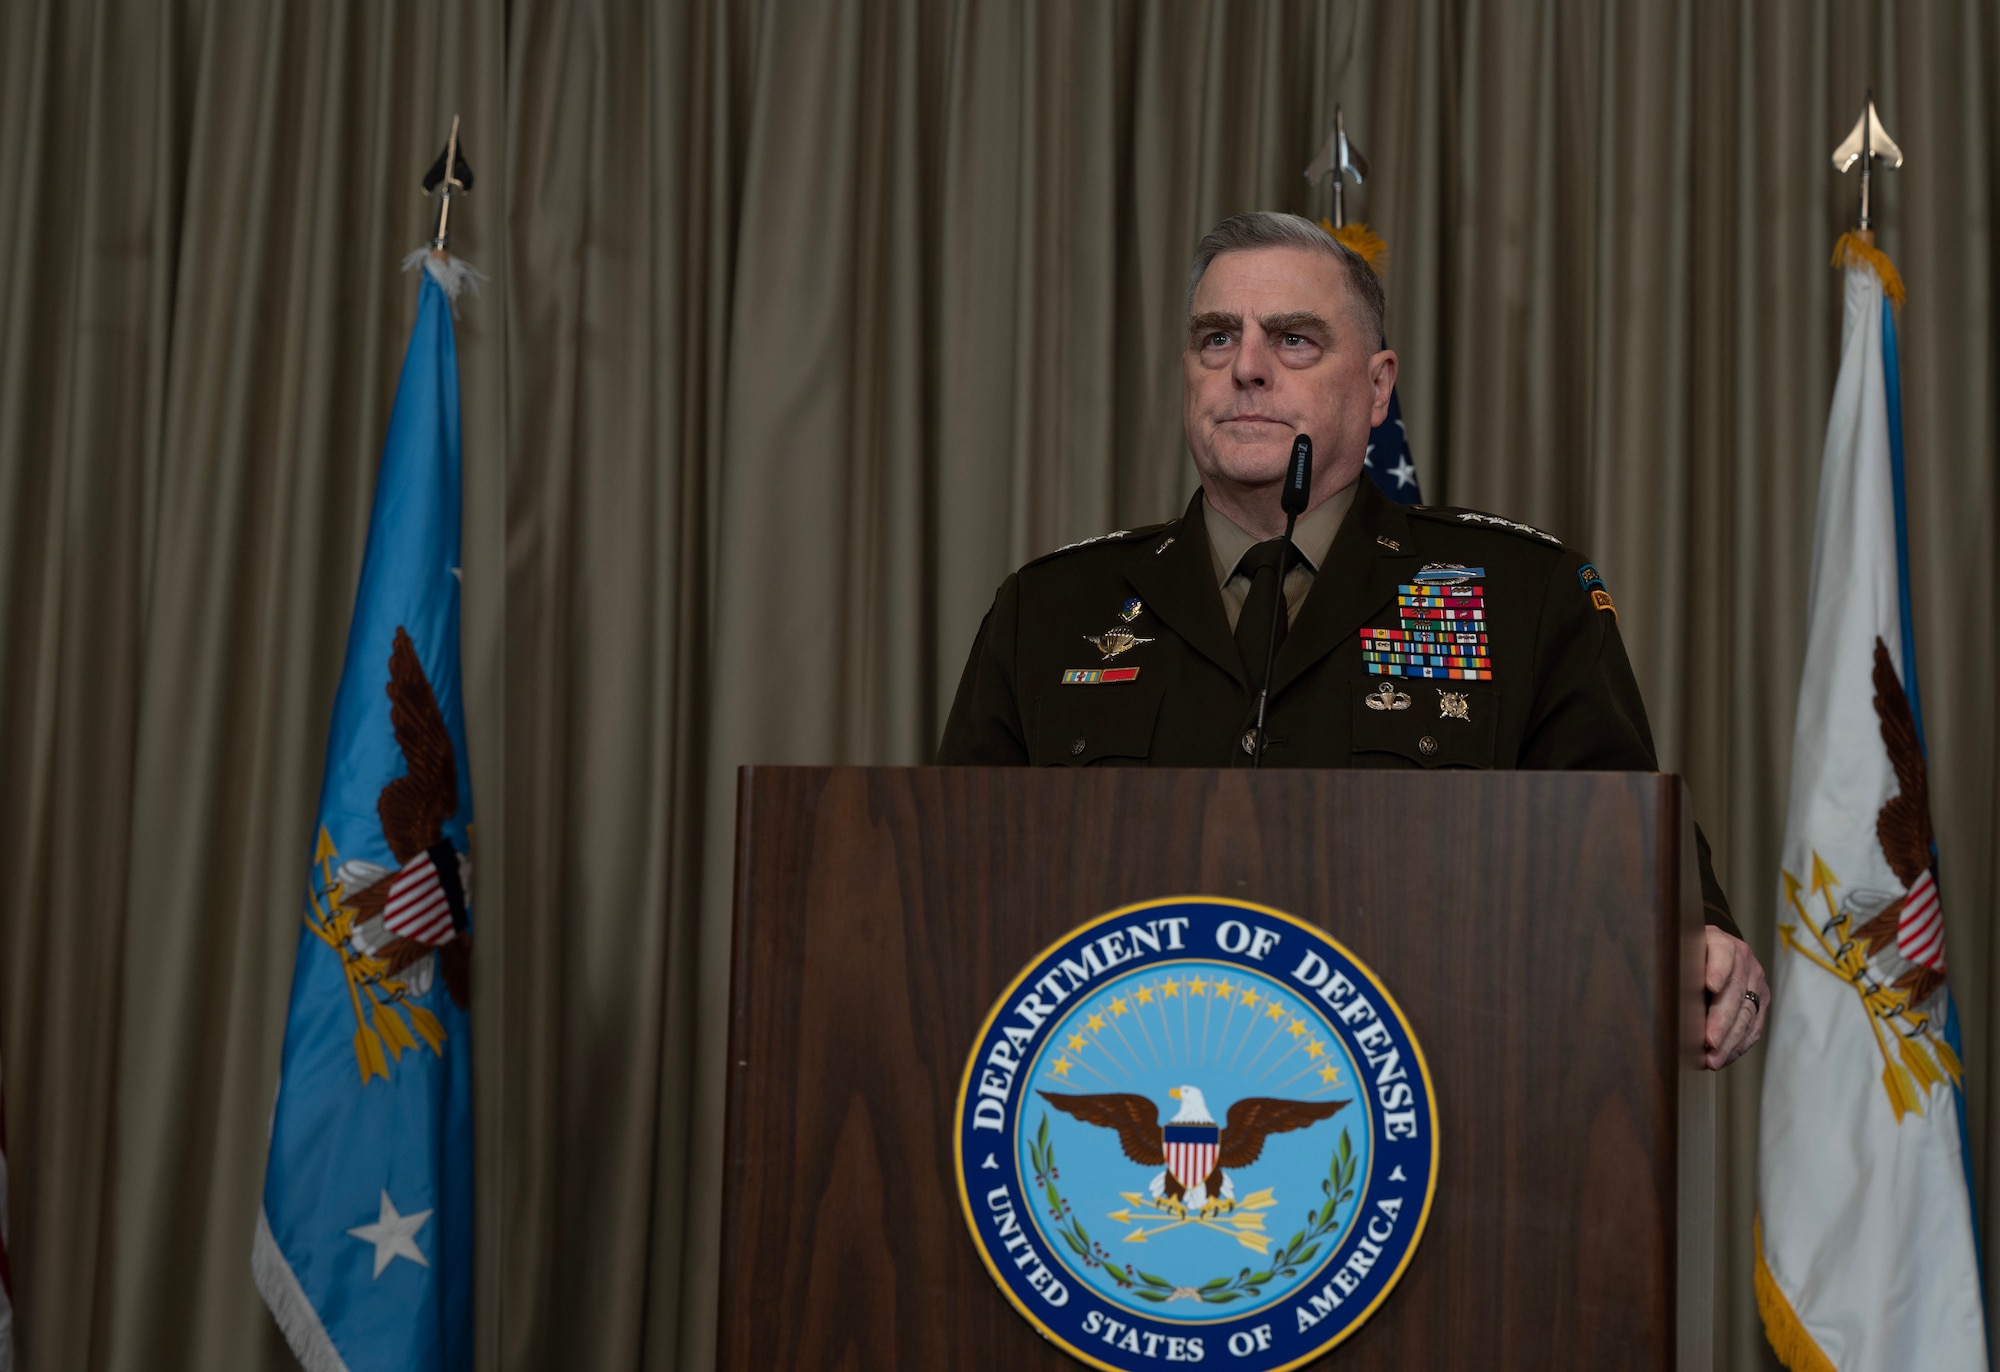 U.S. Chairman of the Joint Chiefs of Staff Gen. Mark A. Milley speaks during a press conference.